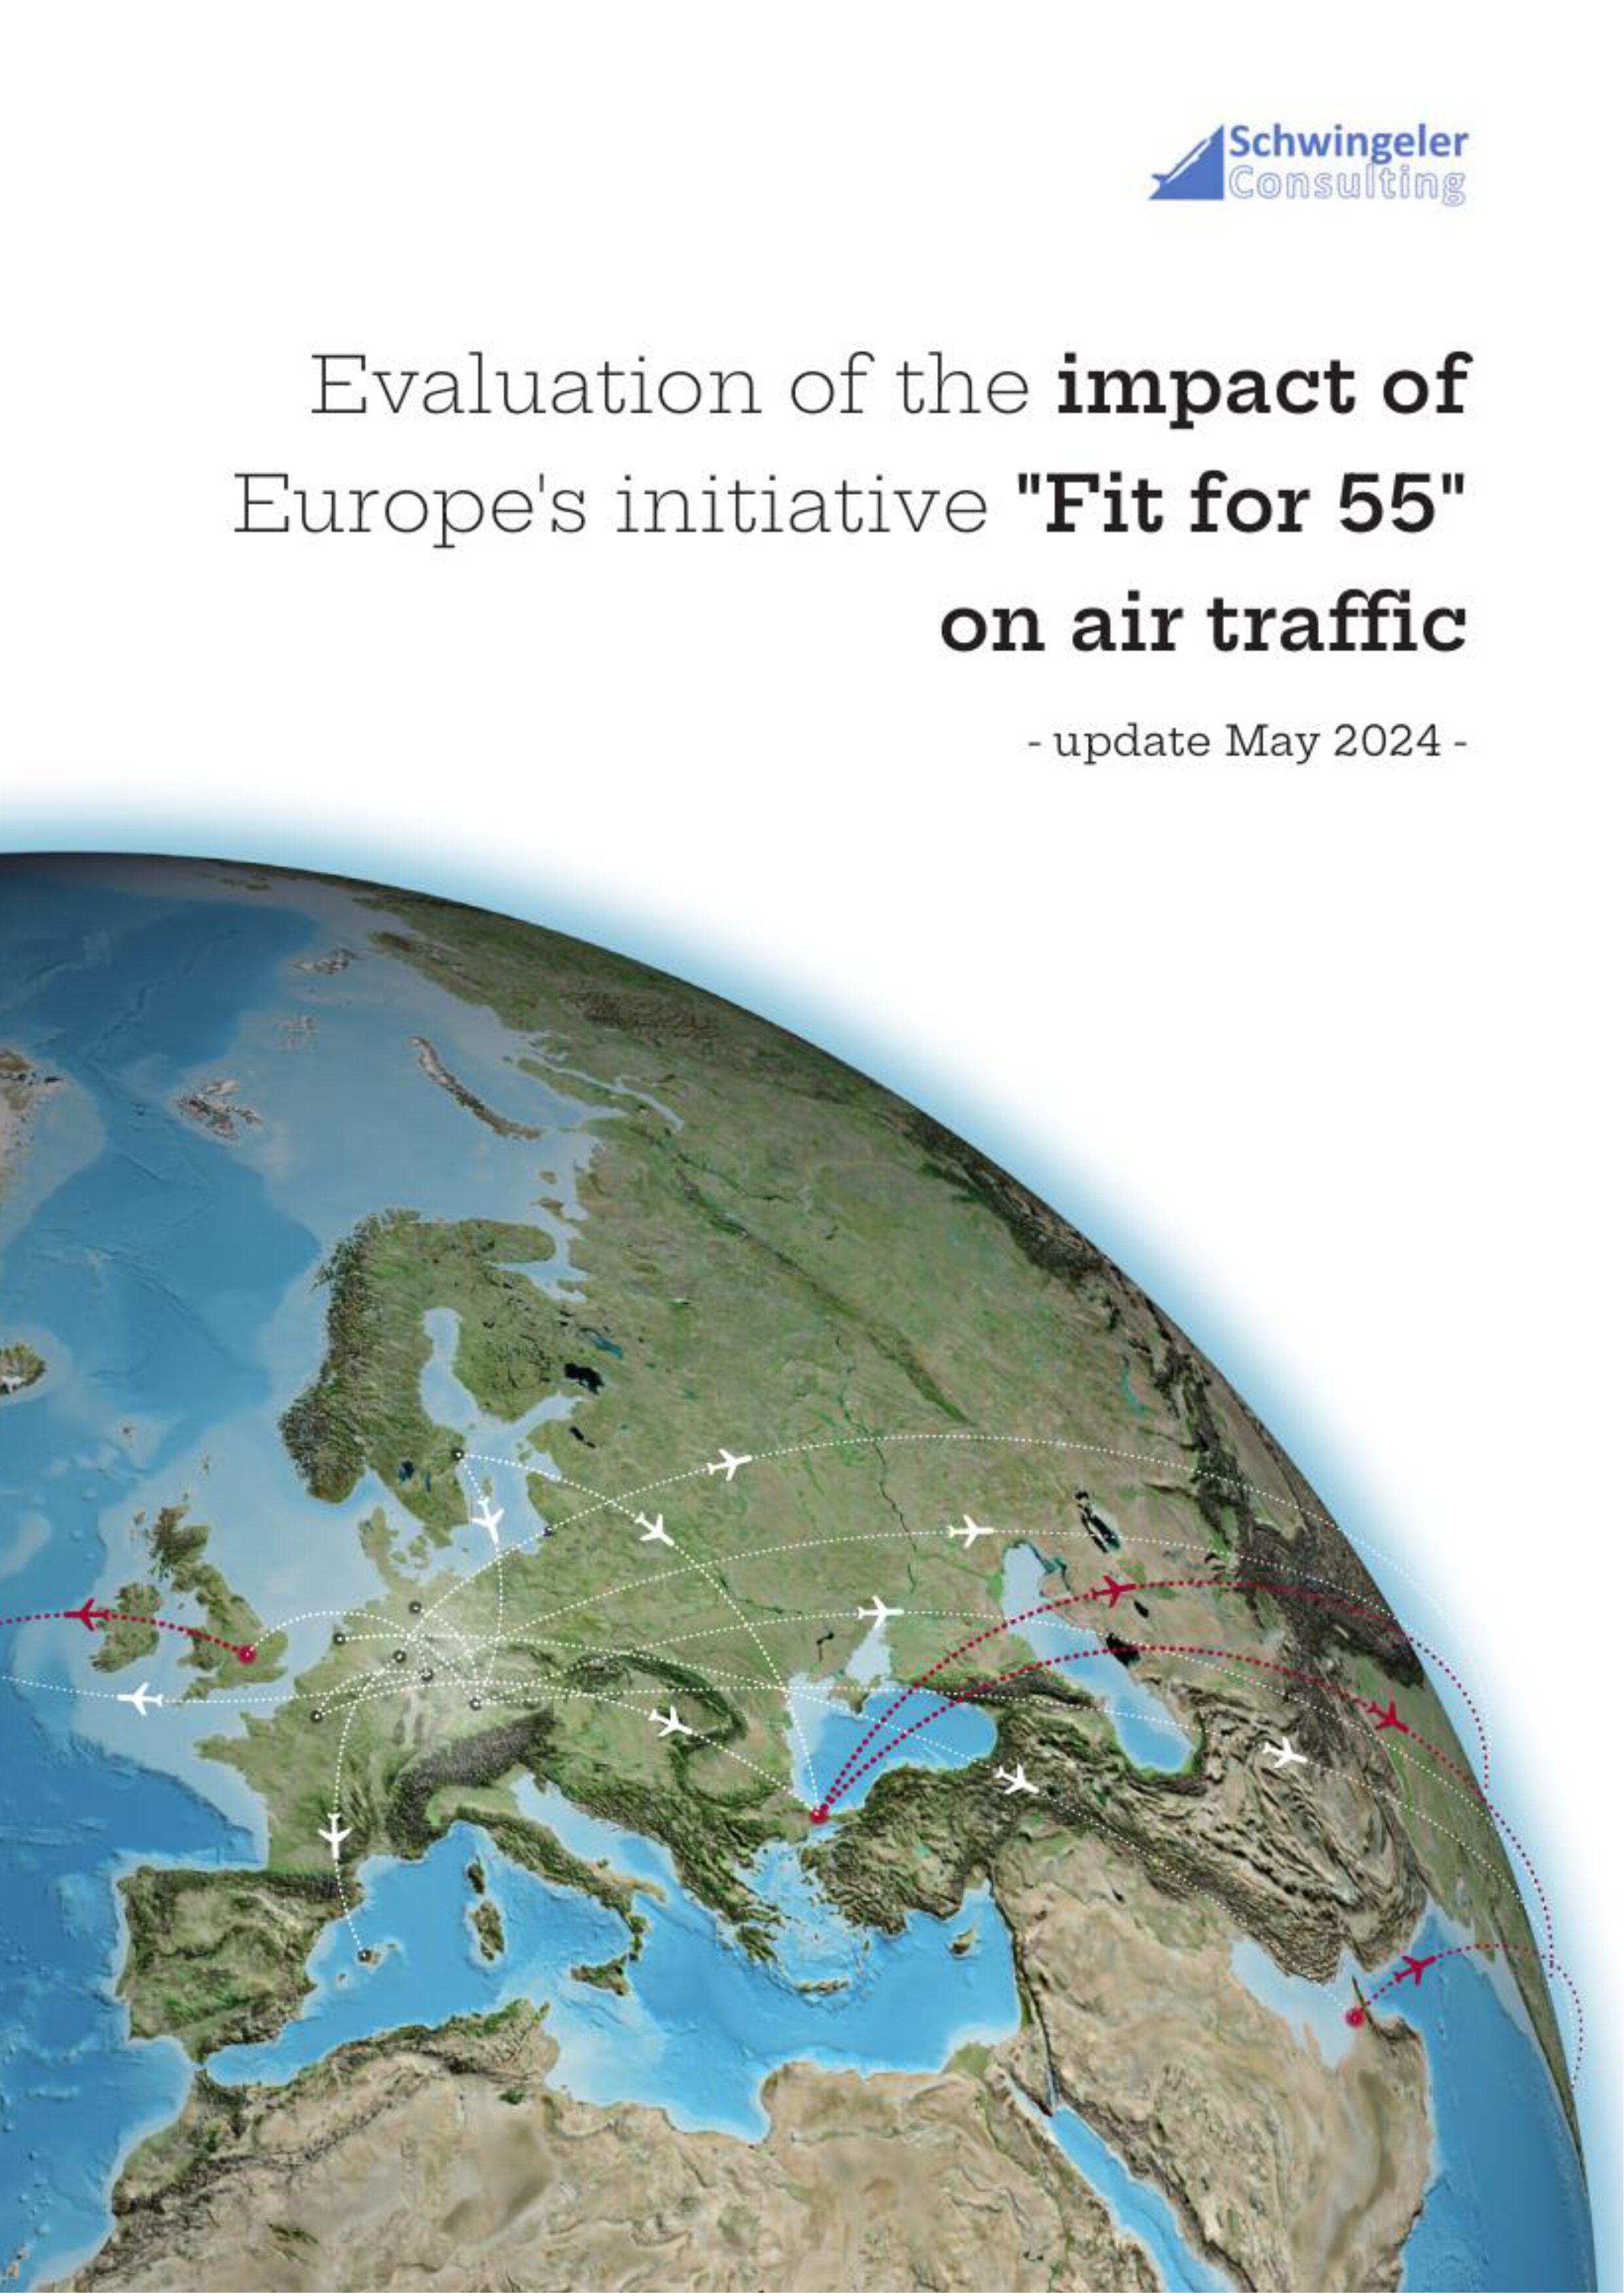 Summary – Evaluation of the impact of Euope´s initiative “Fit for 55” on air traffic